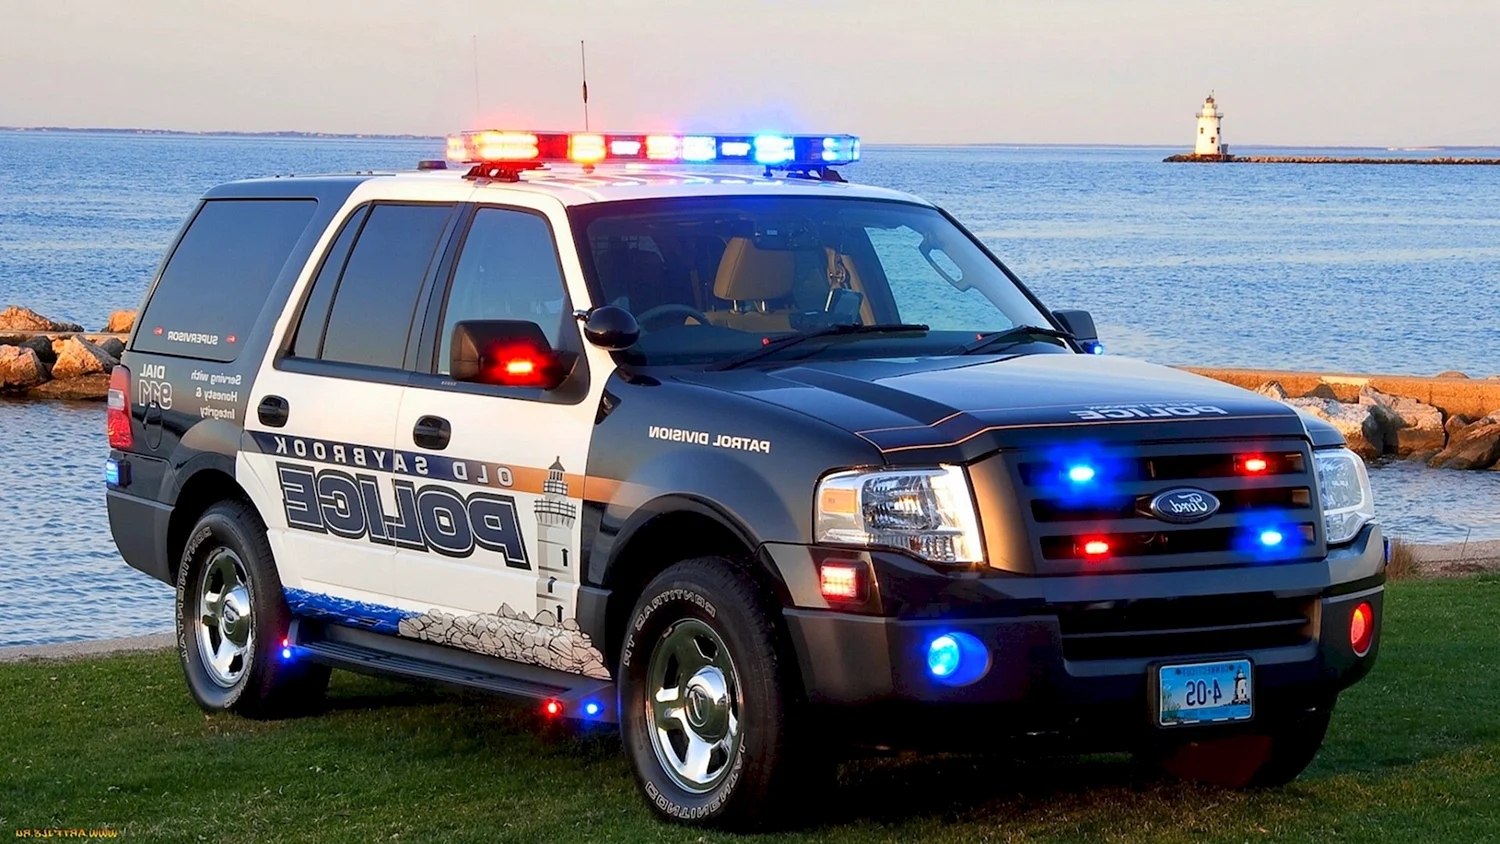 Ford Expedition Police